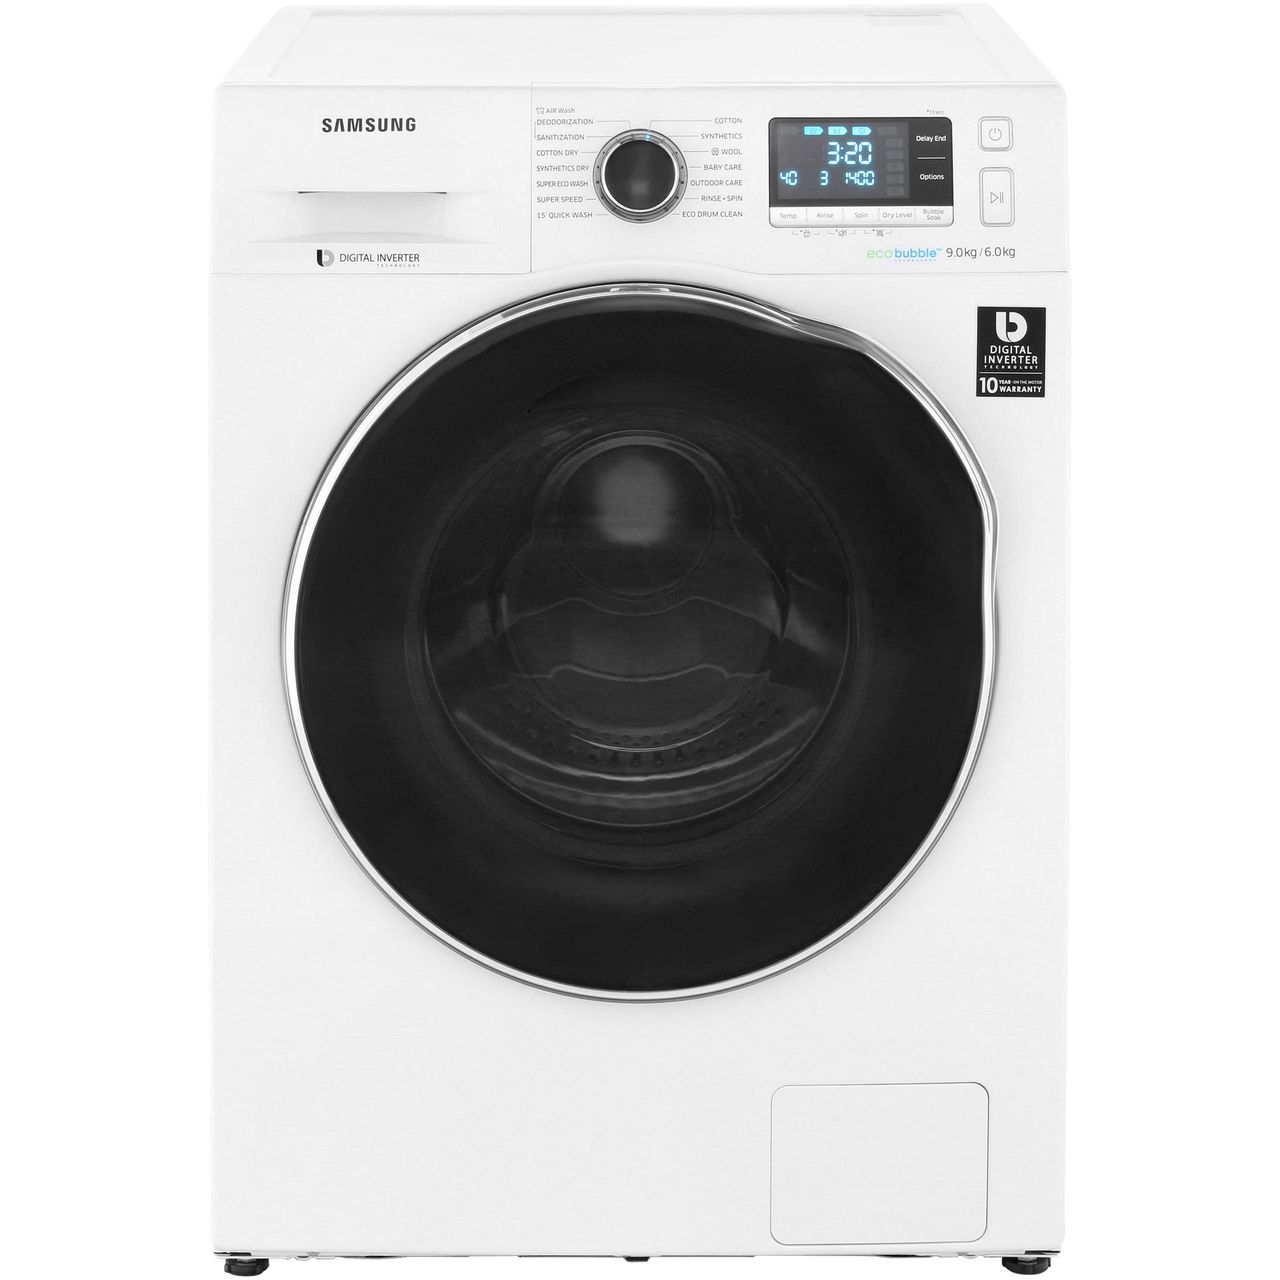 Samsung ecobubble™ WD90J6A10AW 9Kg / 6Kg Washer Dryer with 1400 rpm specs